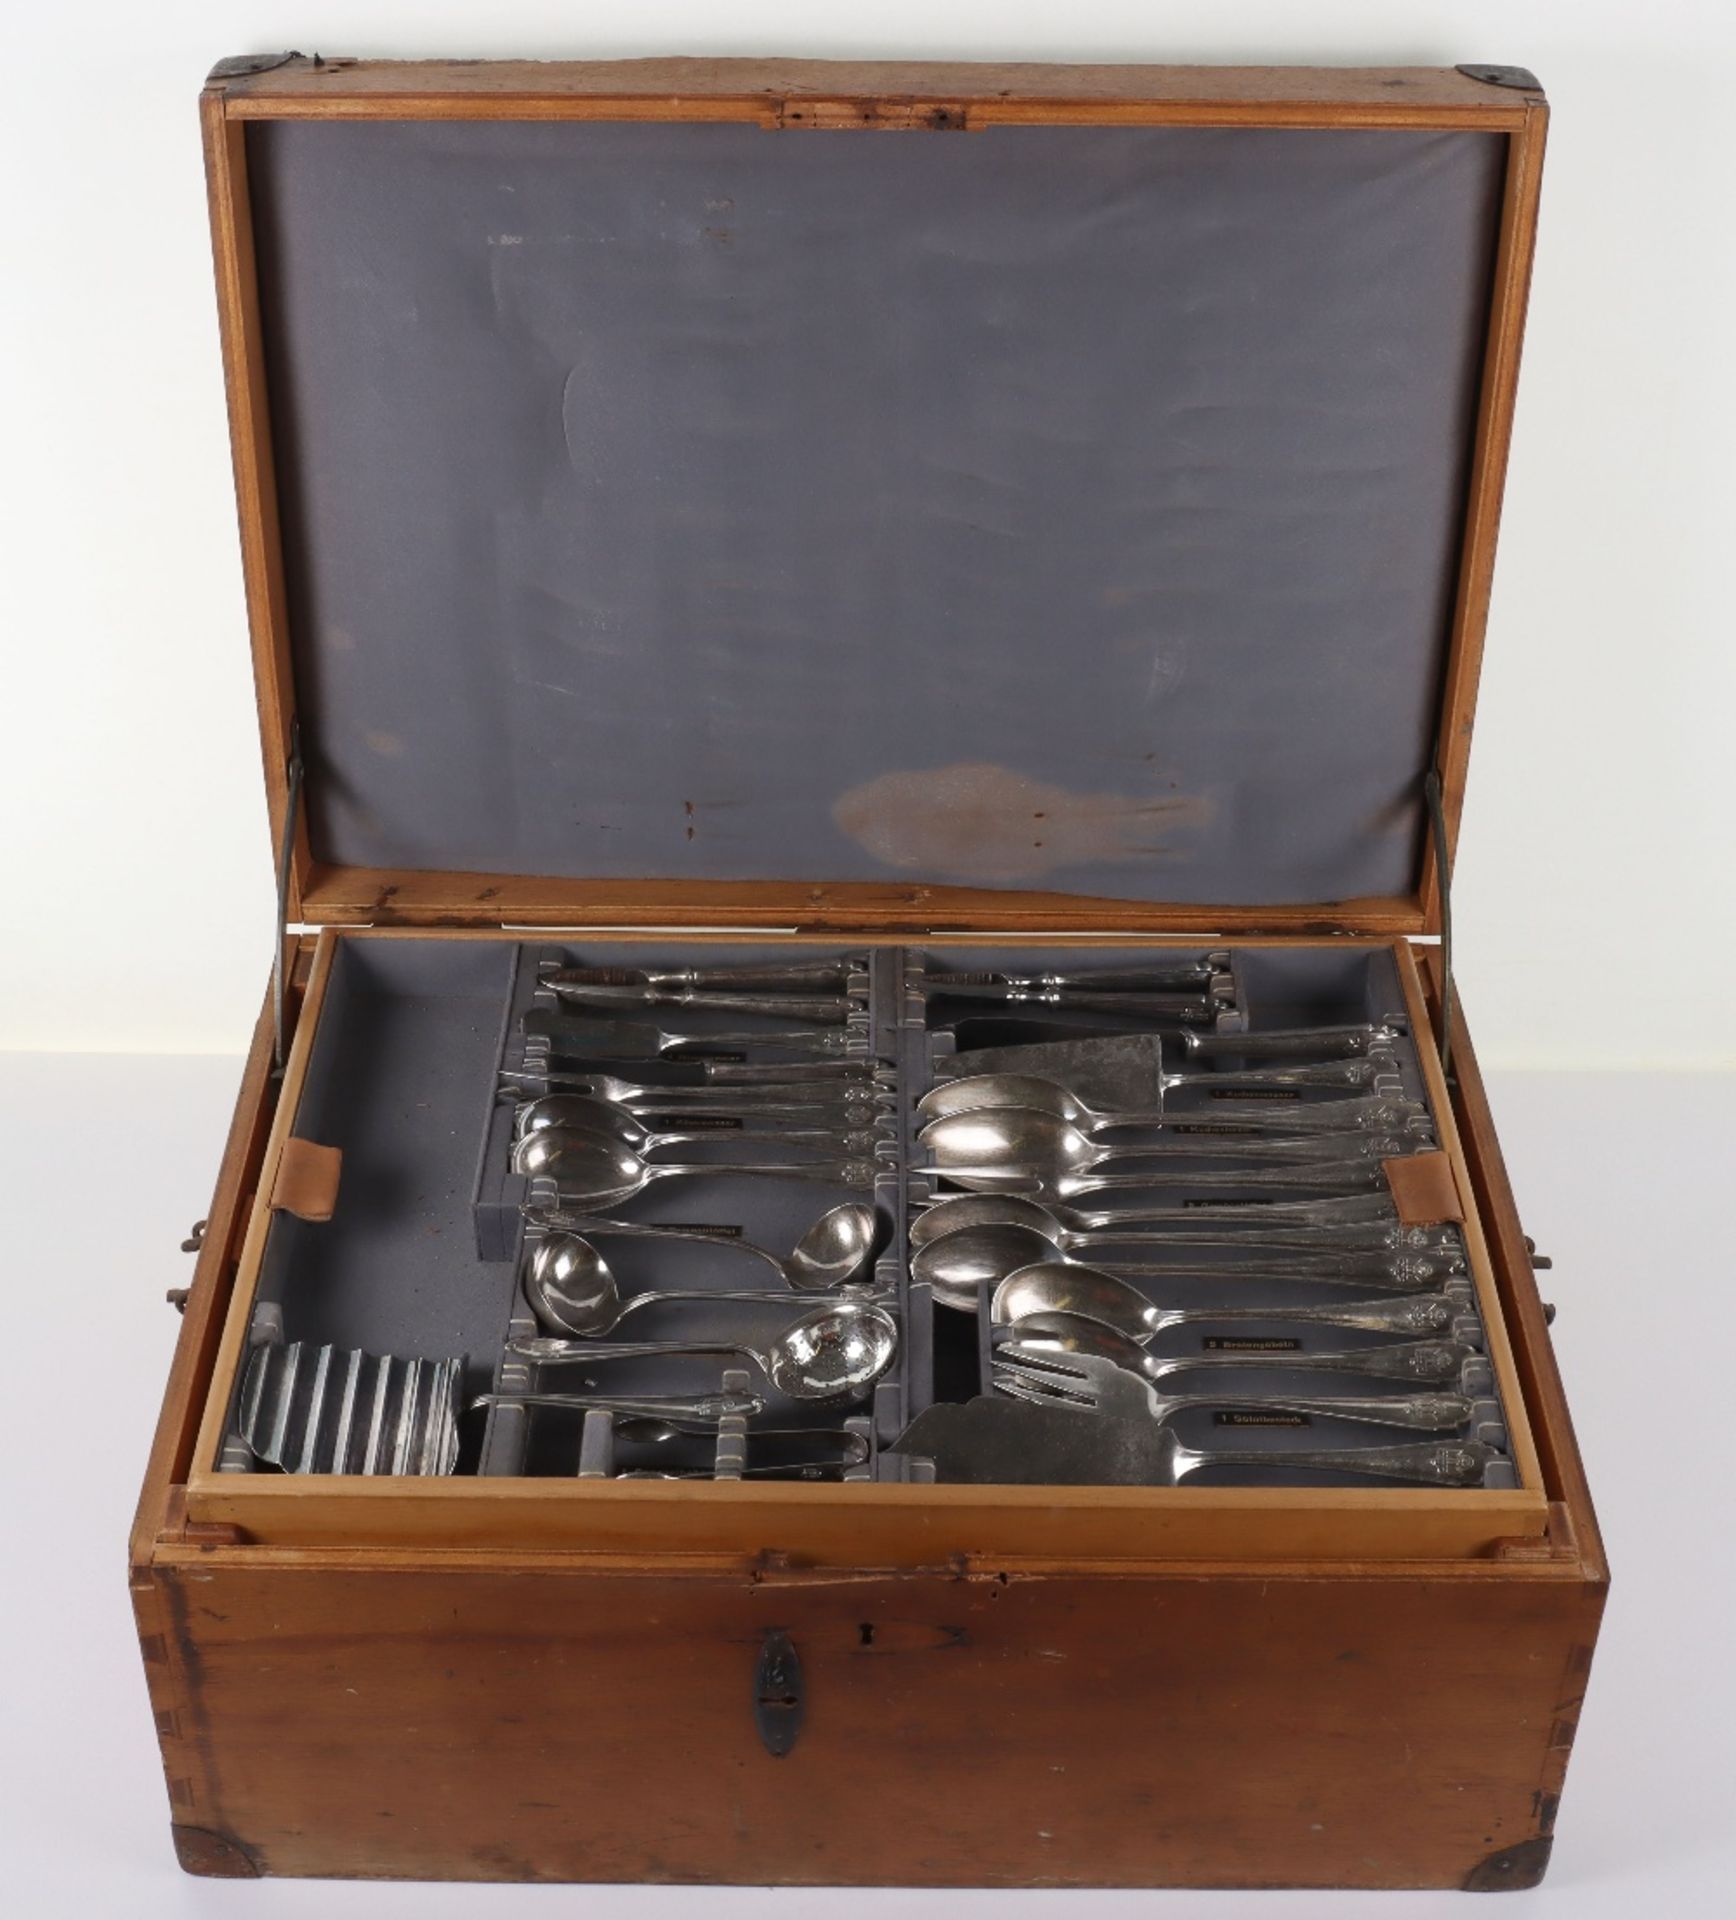 Cased Canteen of Formal Pattern NSDAP Cutlery Liberated From German Embassy in Spain